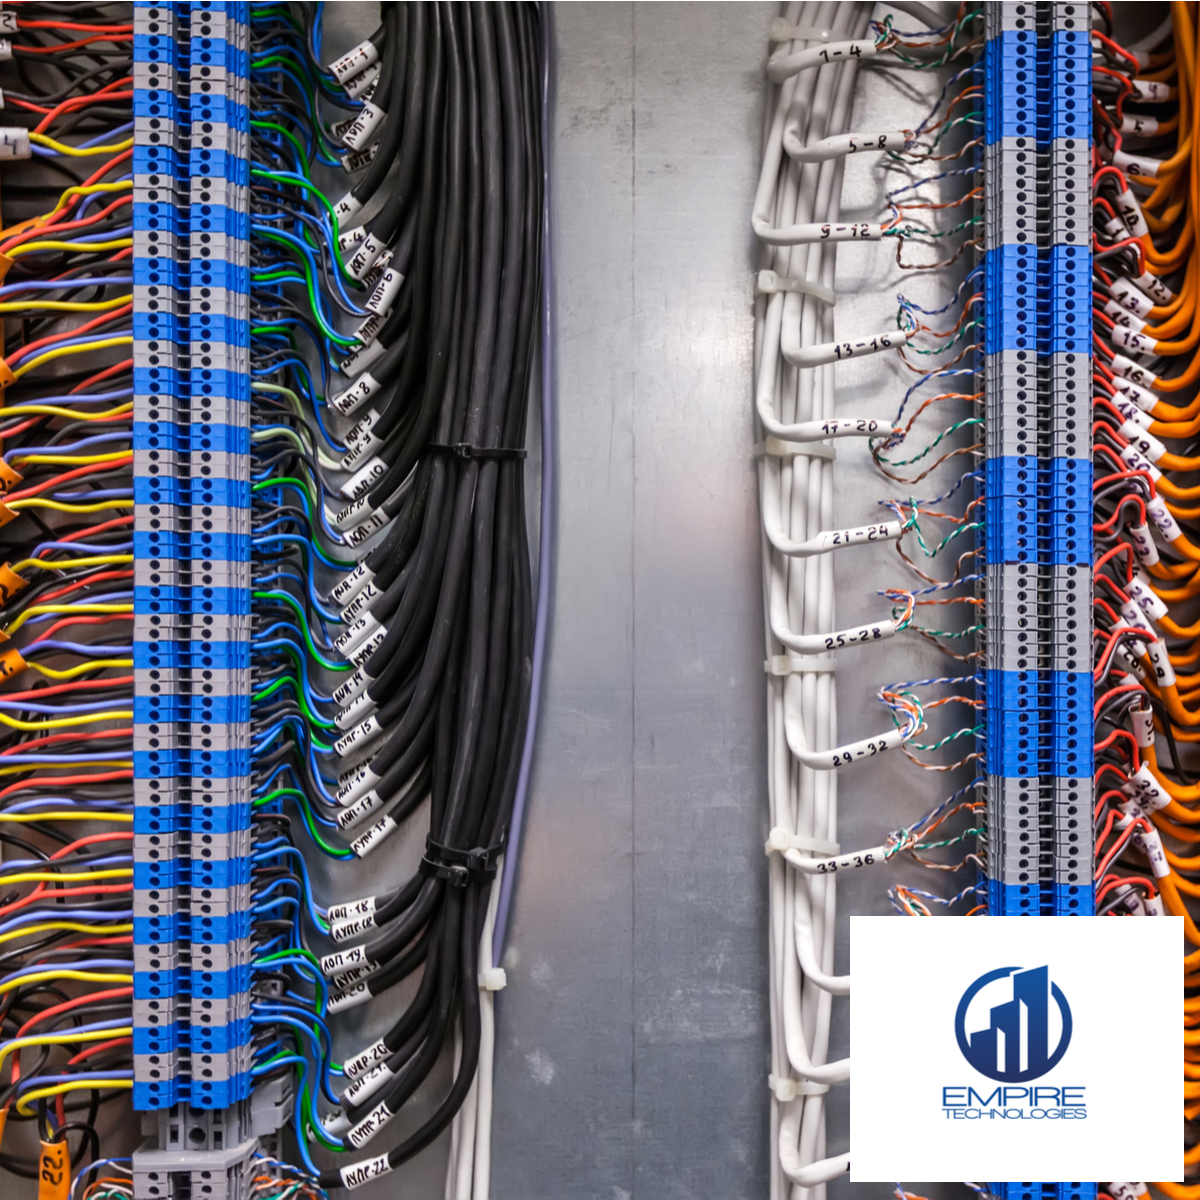 3 Cabling Tips From a Low Voltage Company